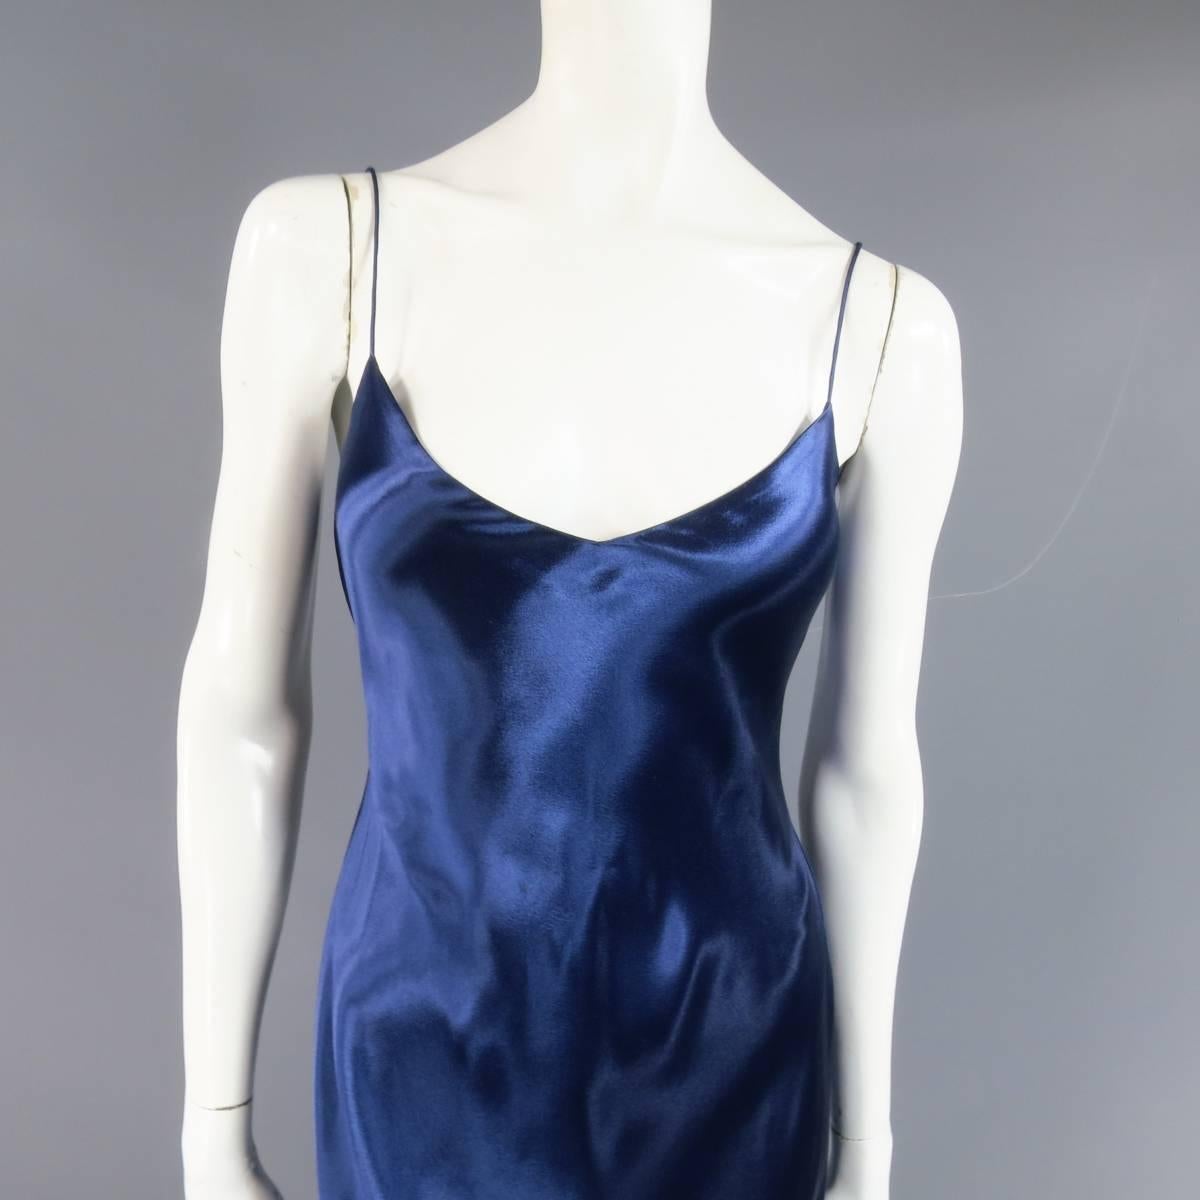 This lovely RALPH LAUREN COLLECTION slip dress comes in a stunning glossy navy blue silk satin and features a v neckline, skinny spaghetti straps, and fitted A line silhouette. Made in Italy.
 
Good Pre-Owned Condition.
No Size Tag.
